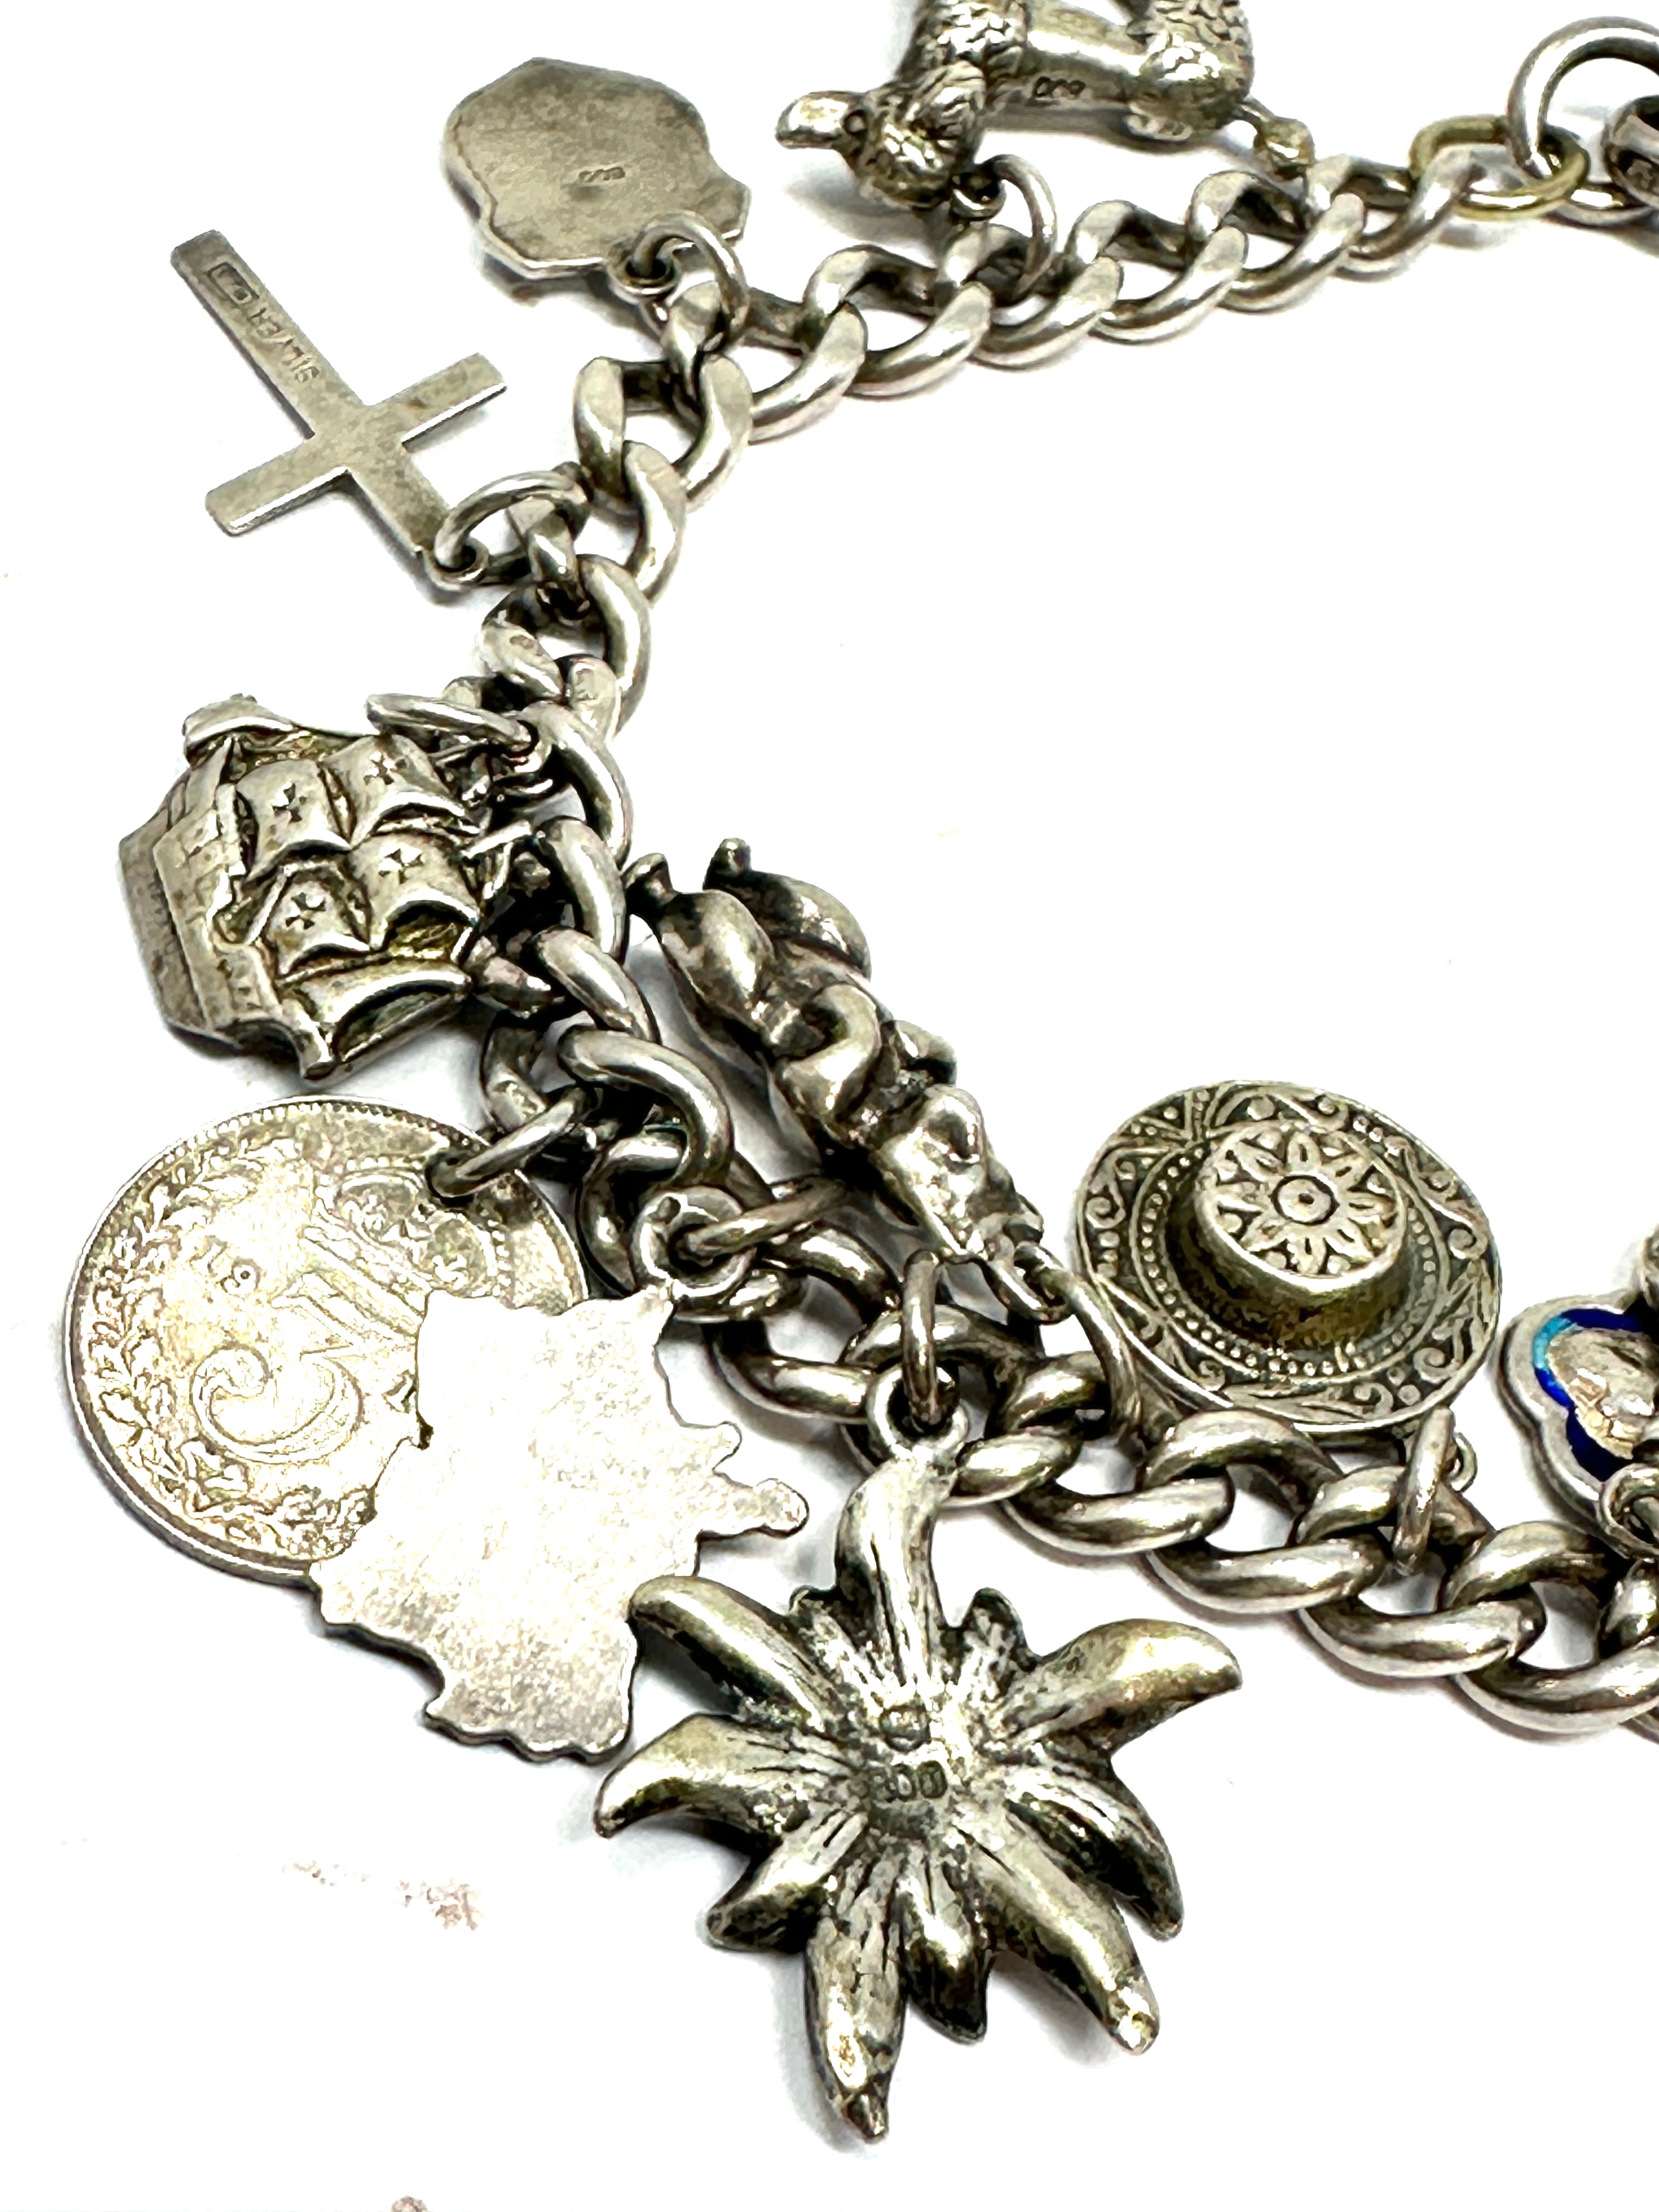 Vintage silver watch chain charm bracelet weight 50g - Image 2 of 4